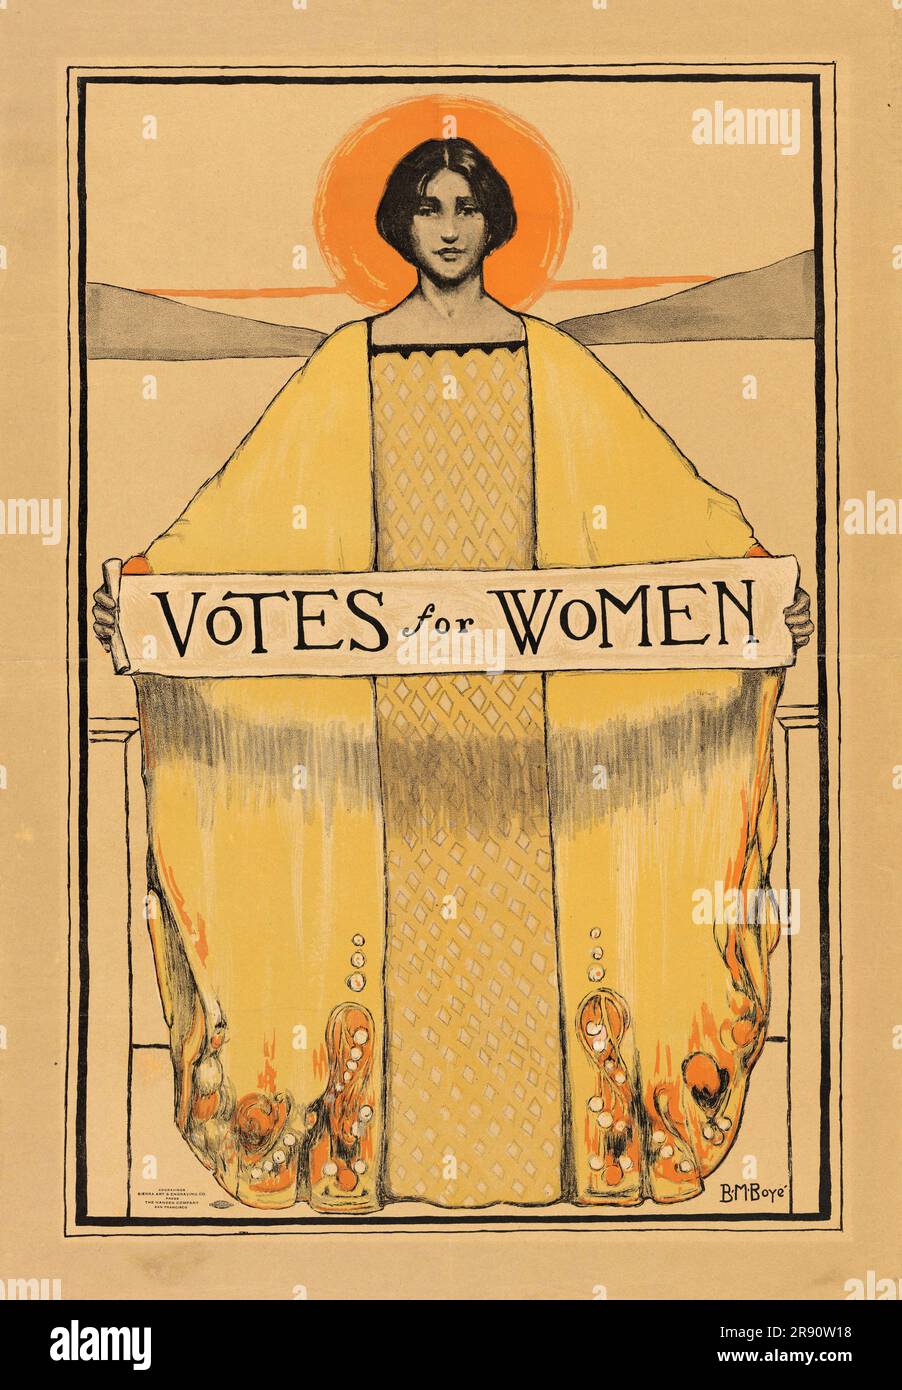 A vintage suffragette campaign poster Stock Photo